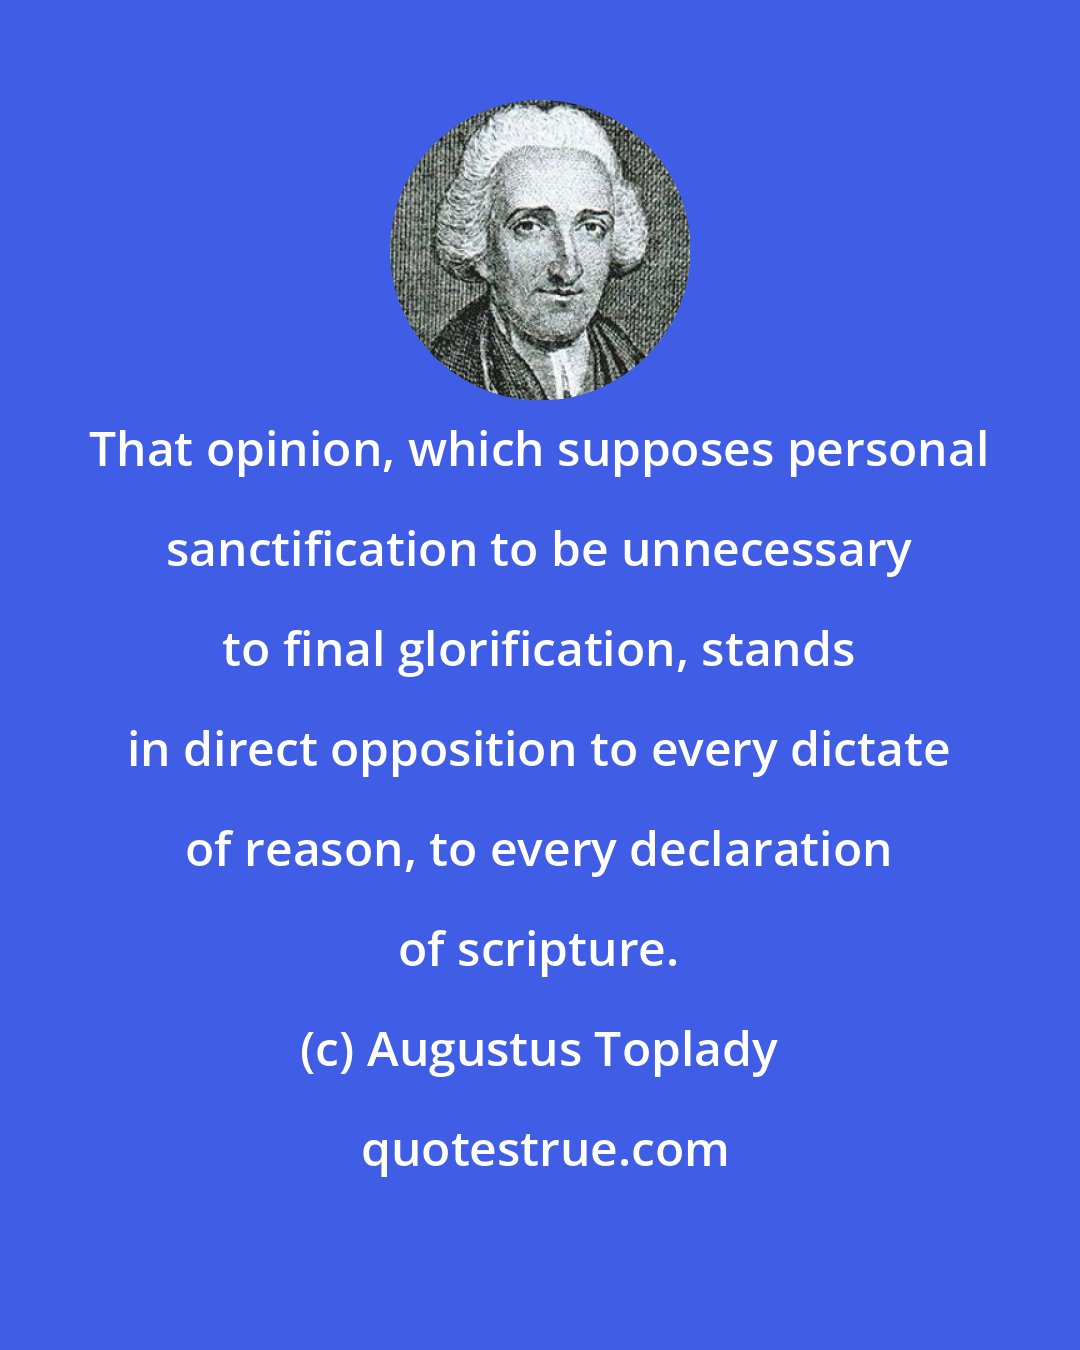 Augustus Toplady: That opinion, which supposes personal sanctification to be unnecessary to final glorification, stands in direct opposition to every dictate of reason, to every declaration of scripture.